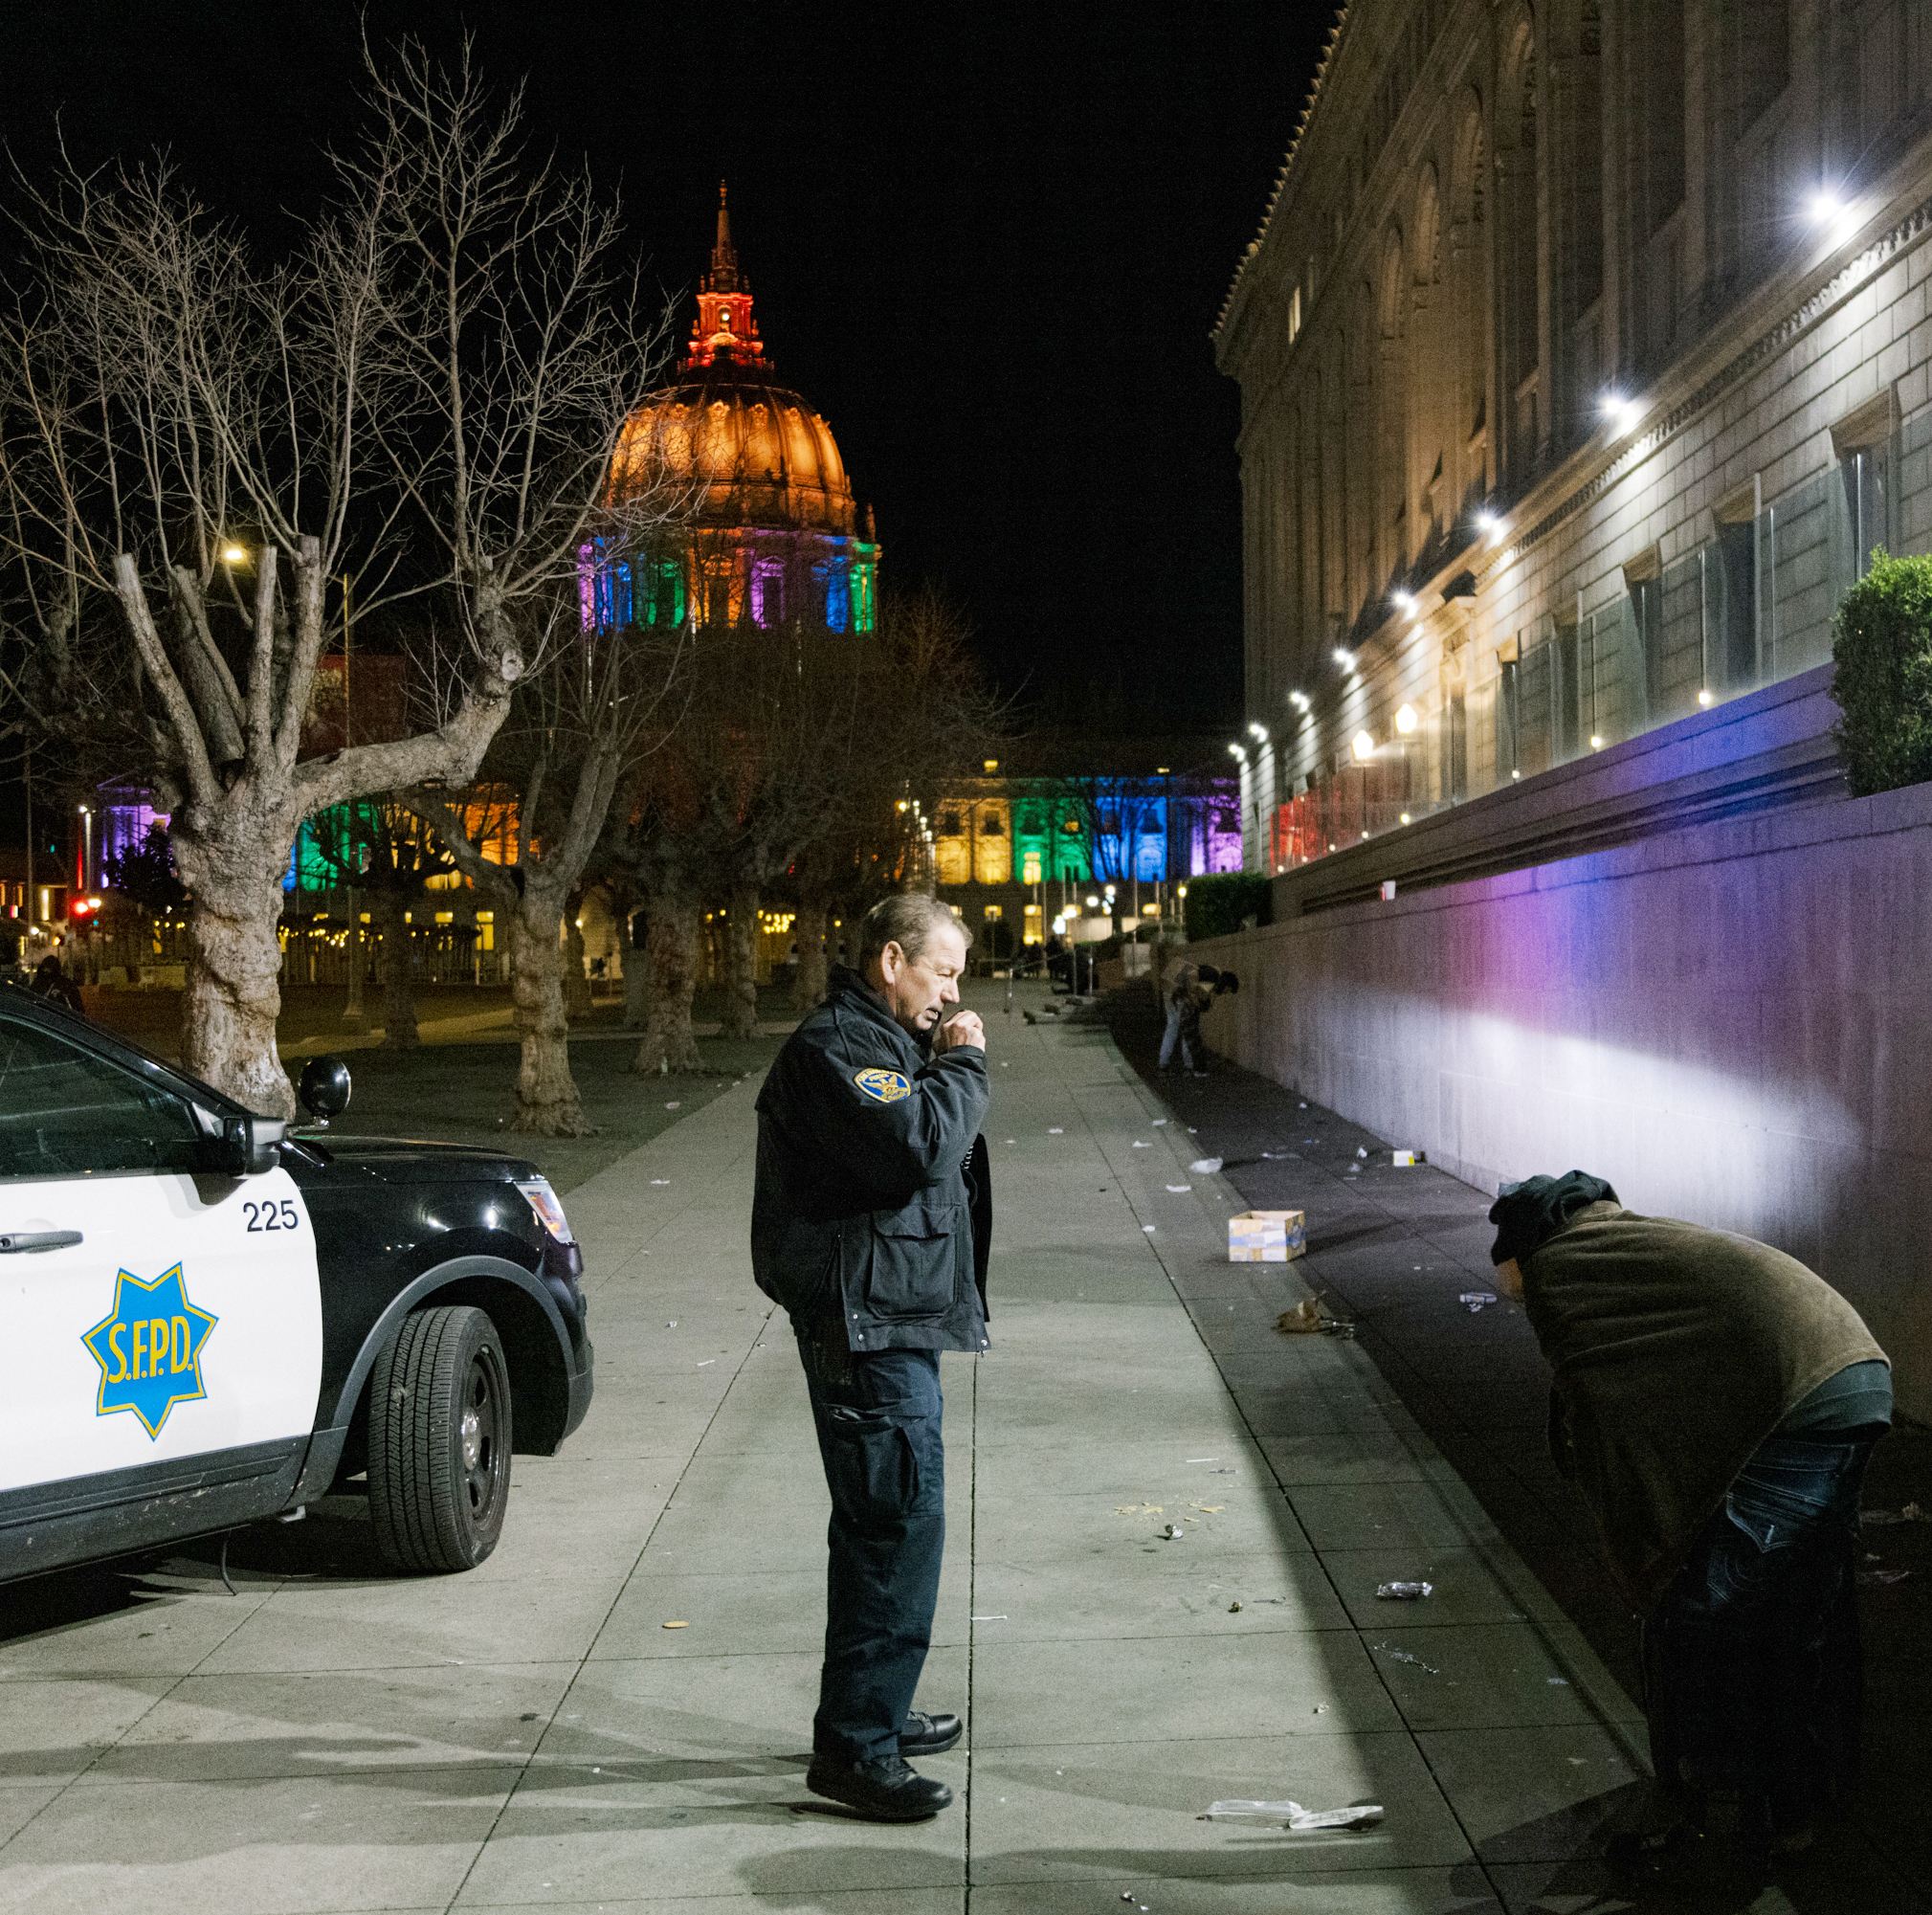 A police officer observing a person near a lit-up building at night, with a patrol car nearby.